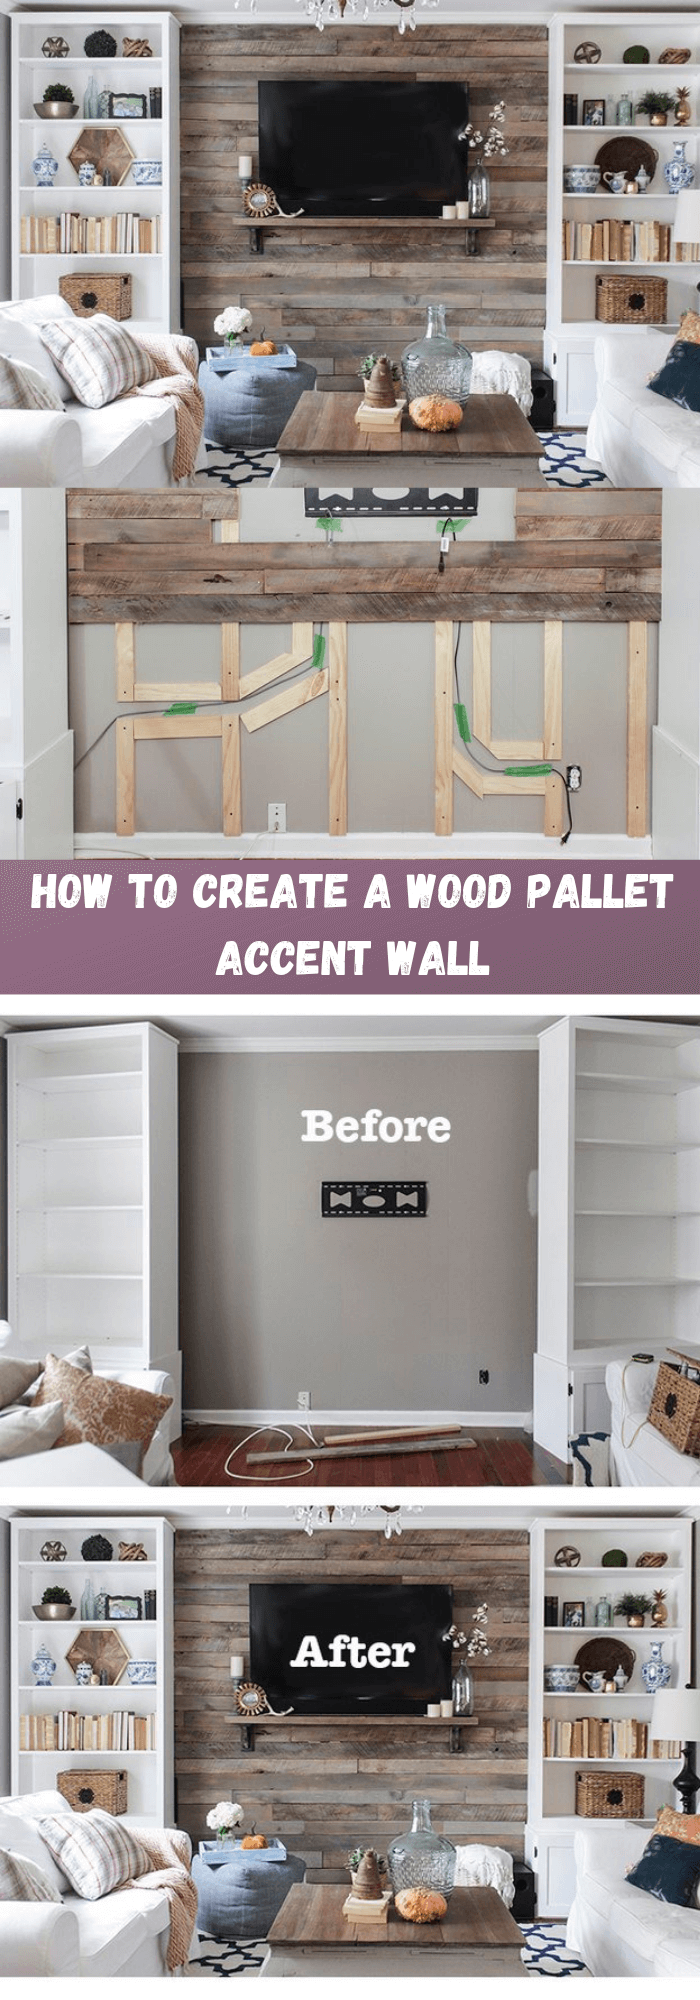 DIY Wood Pallet Accent Wall